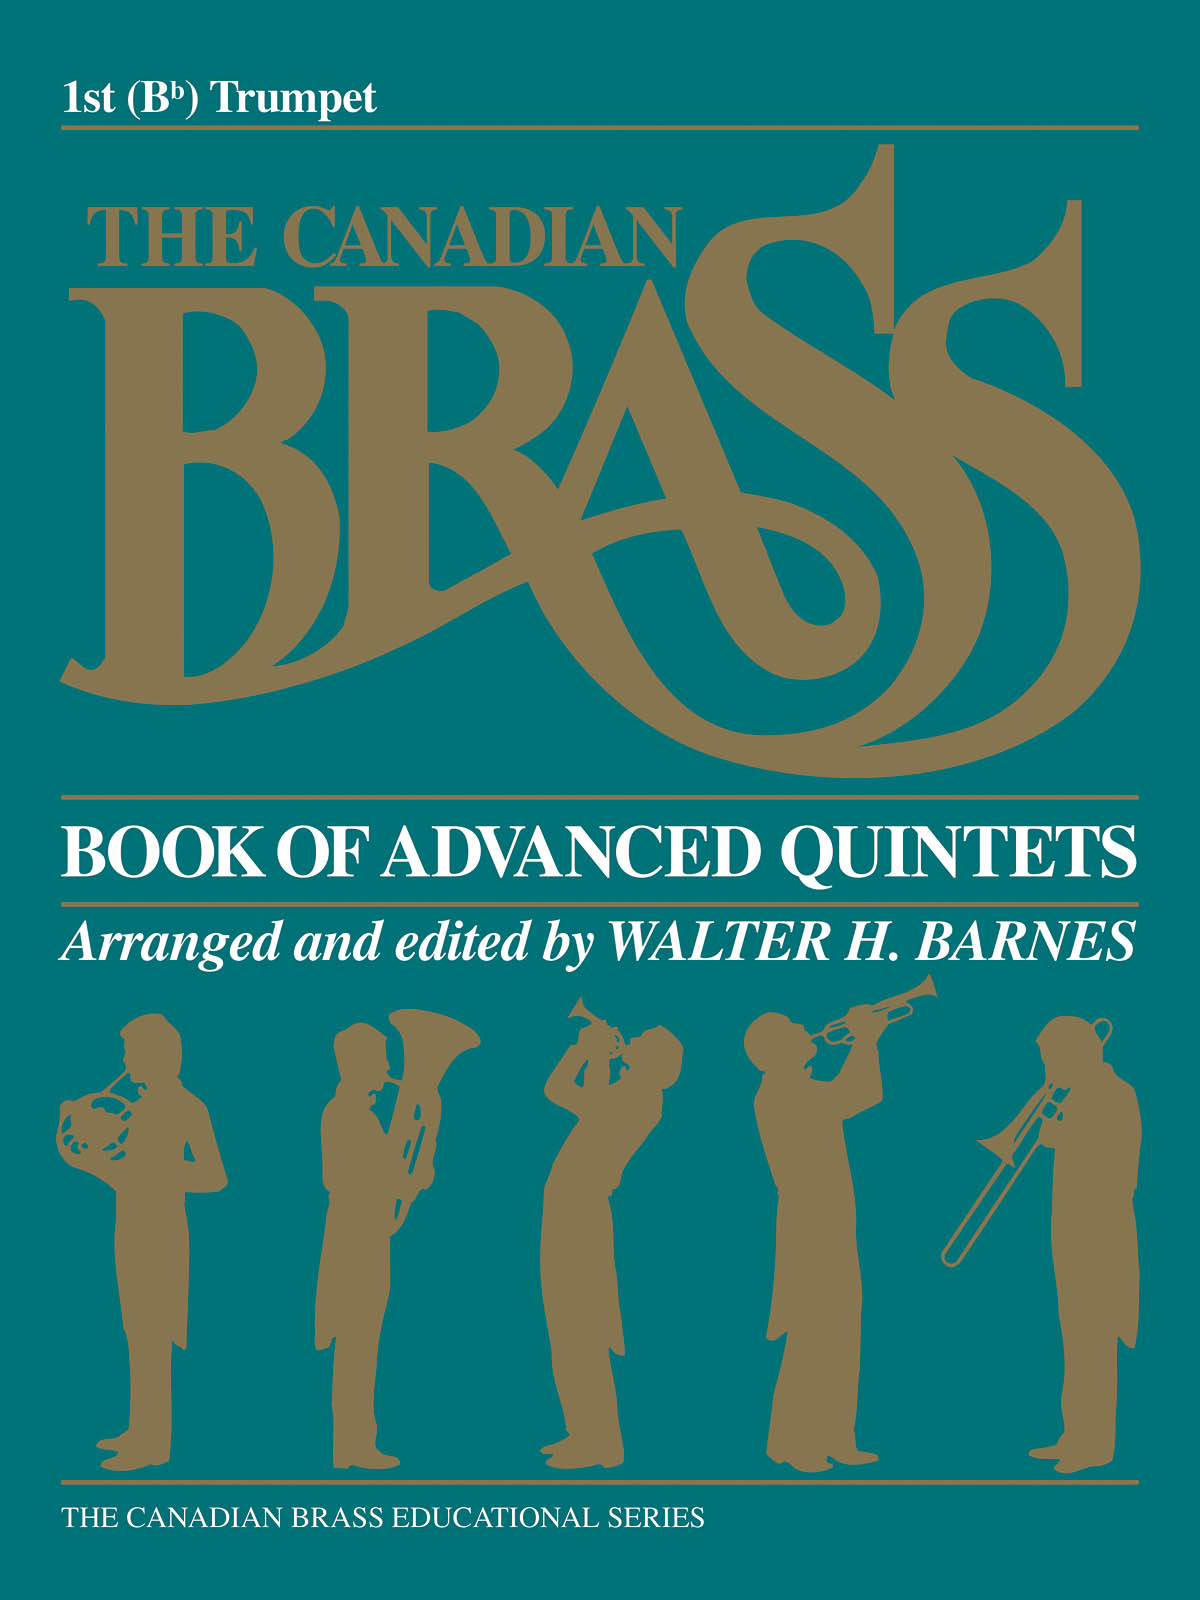 The Canadian Brass: The Canadian Brass Book of Advanced Quintets: Trumpet: Part